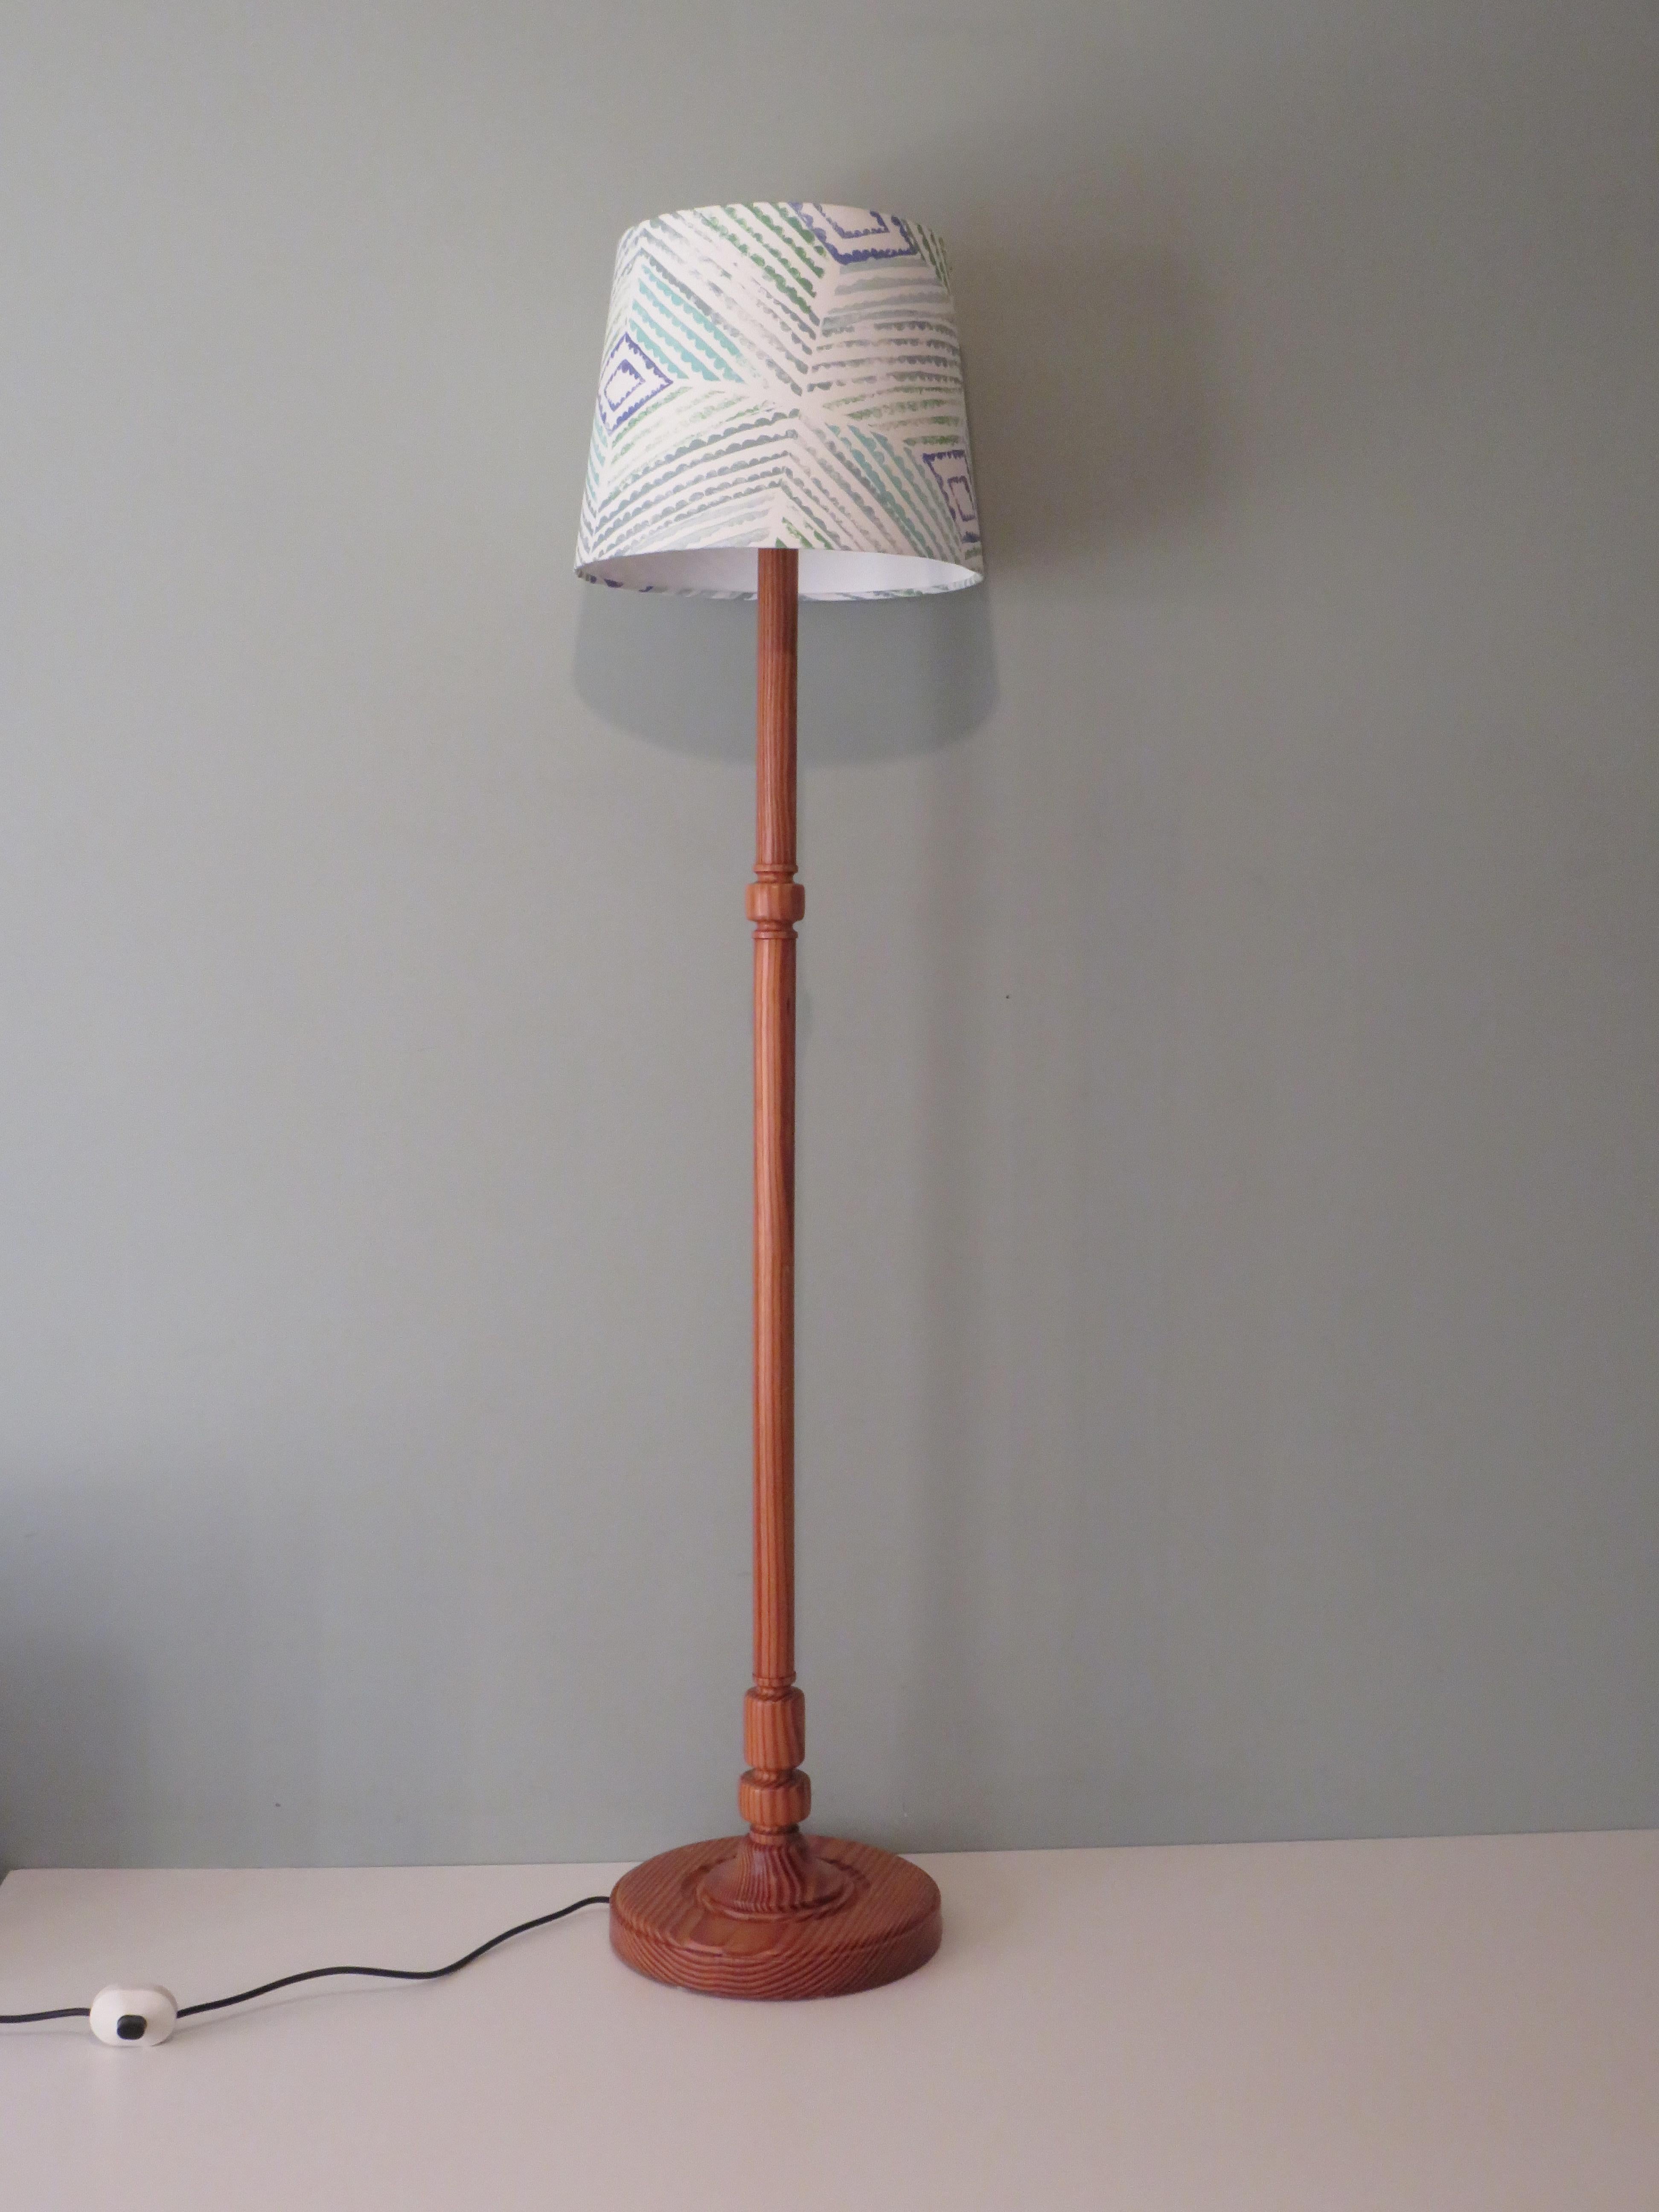 Pine lamp base with new, custom-made lampshade in white and blue and green tones.
Lamp base: H 130 cm, Diameter 35 cm
Lampshade: H 28.5 cm, Diameter 35 cm and 28 cm
Total height: 149 cm
1 x E27.